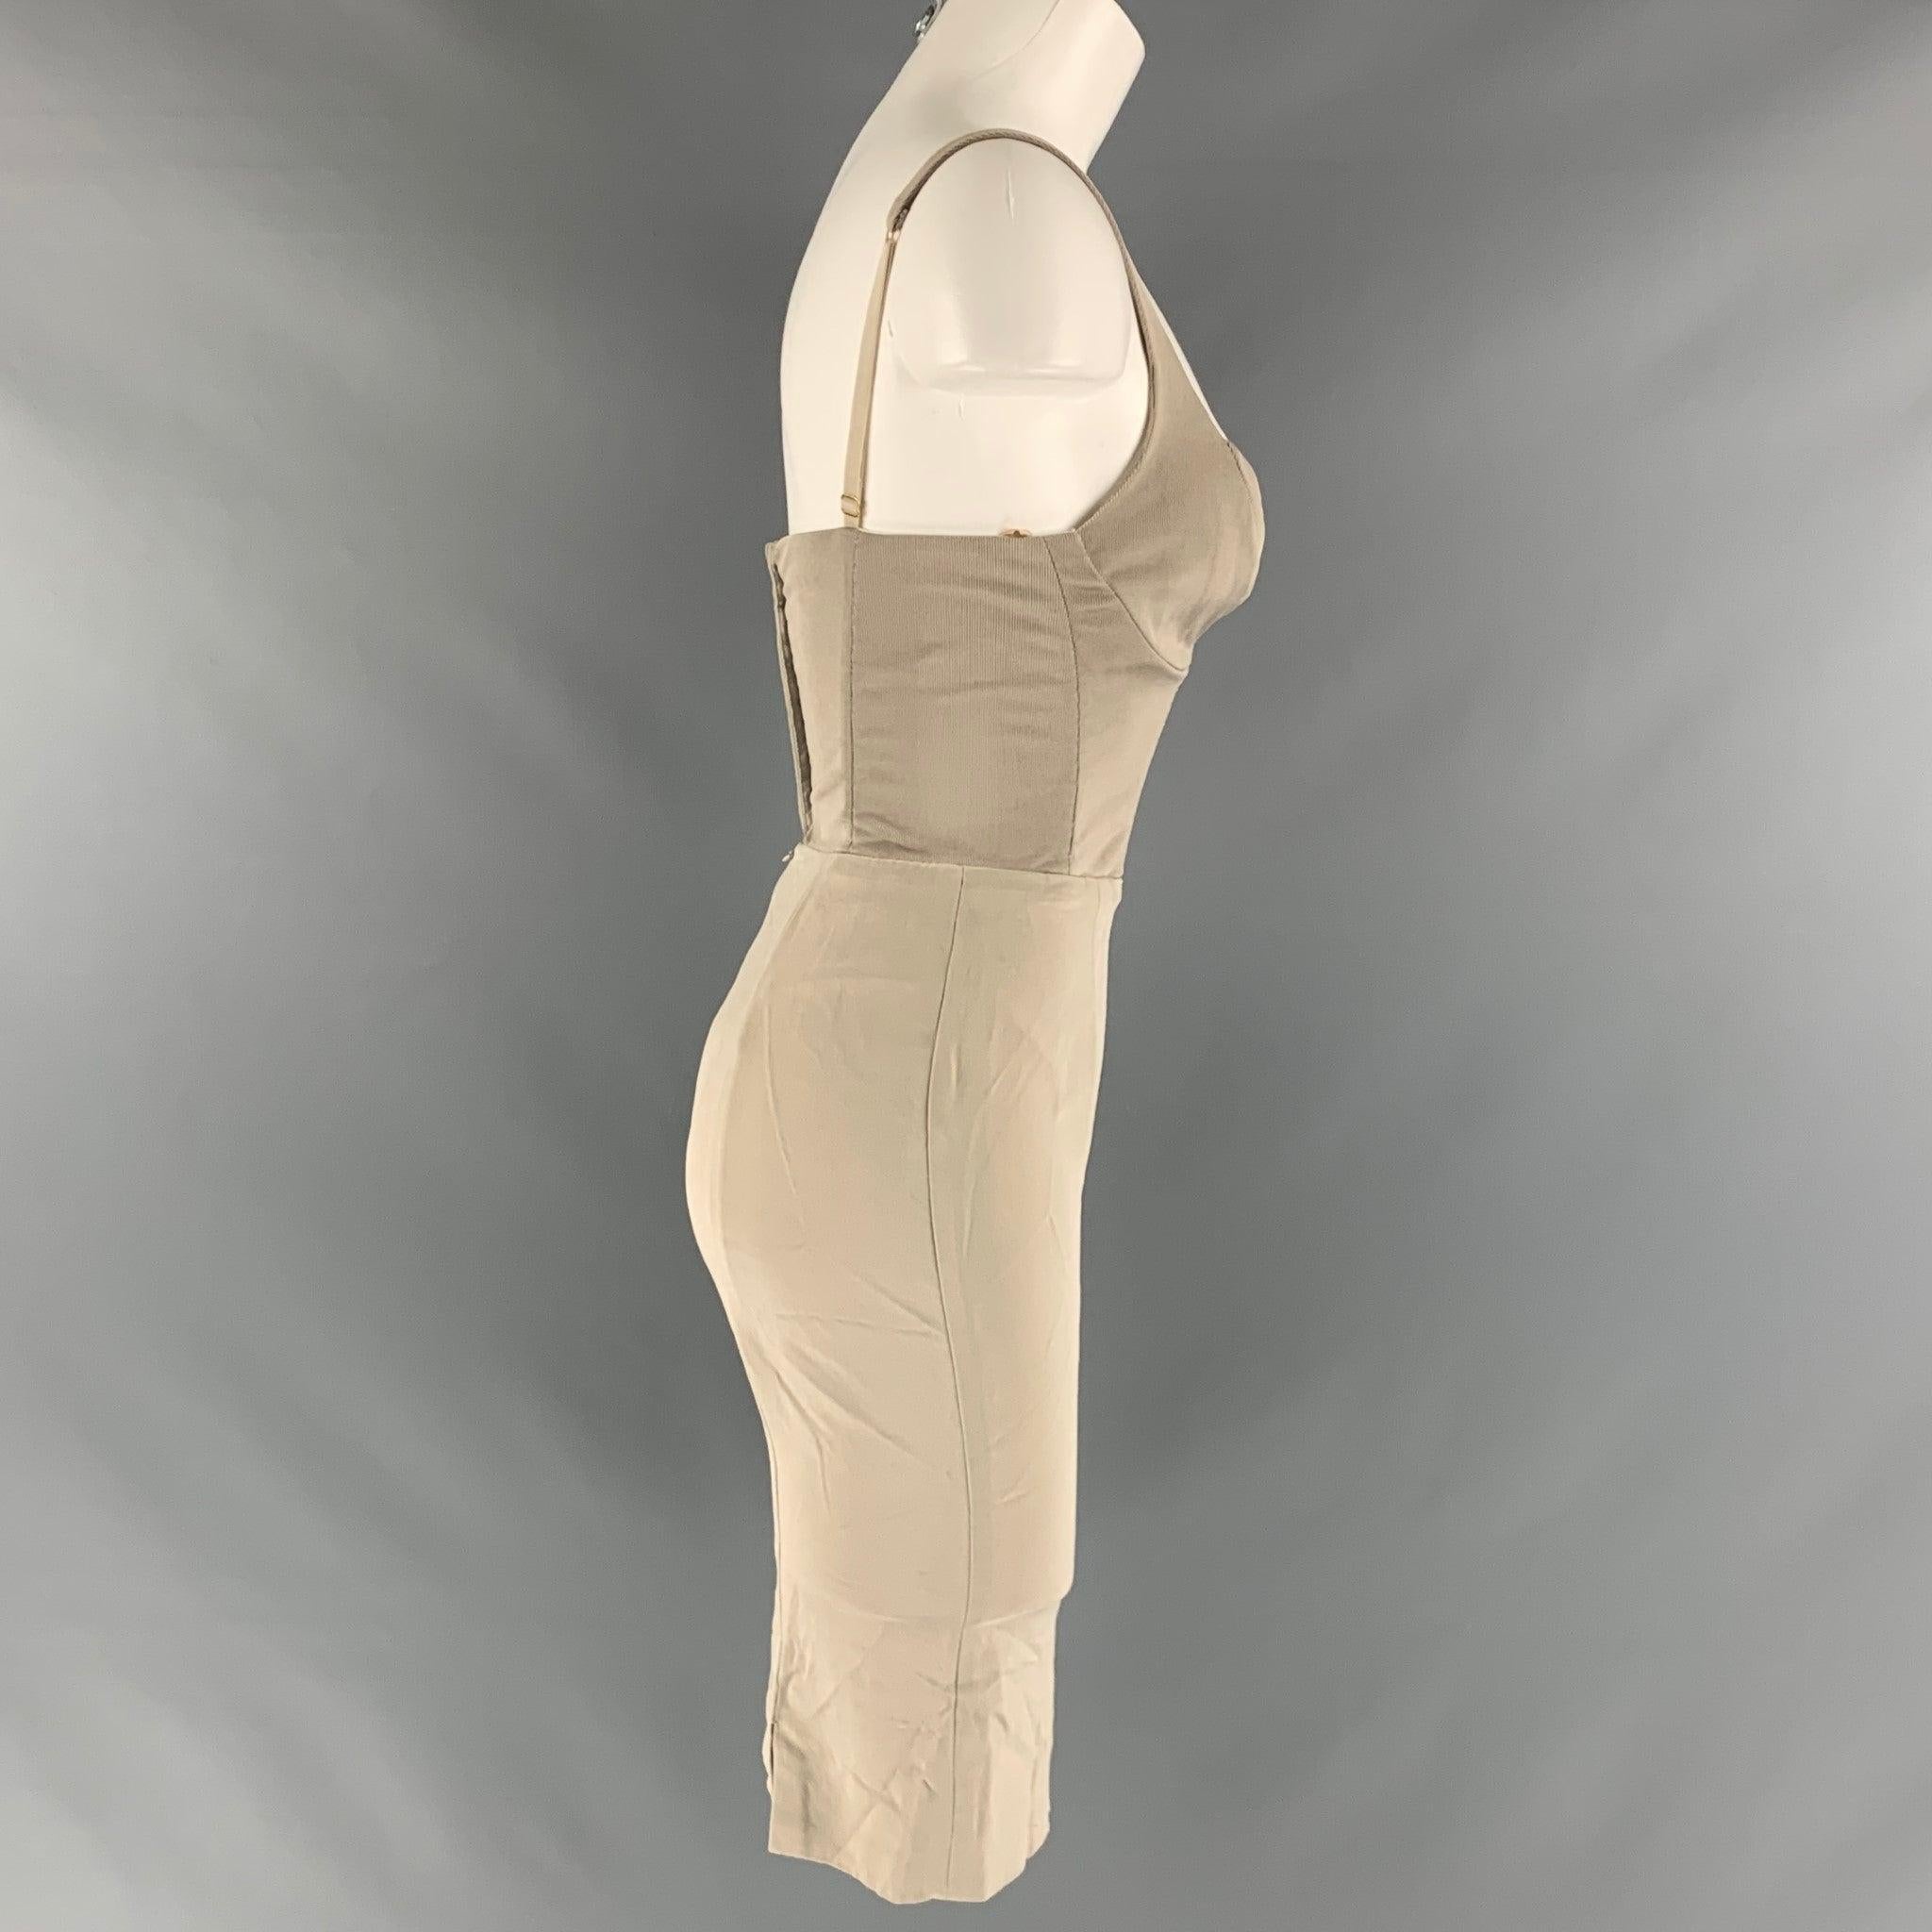 DONNA KARAN VINTAGE bustier dress comes in grey viscose knit material featuring a spaghetti strap bustier bodice top, body con skirt, and a hood and eye with zip up closure. Made in USA.Very Good Pre-Owned Condition. Moderate Signs of Wear.